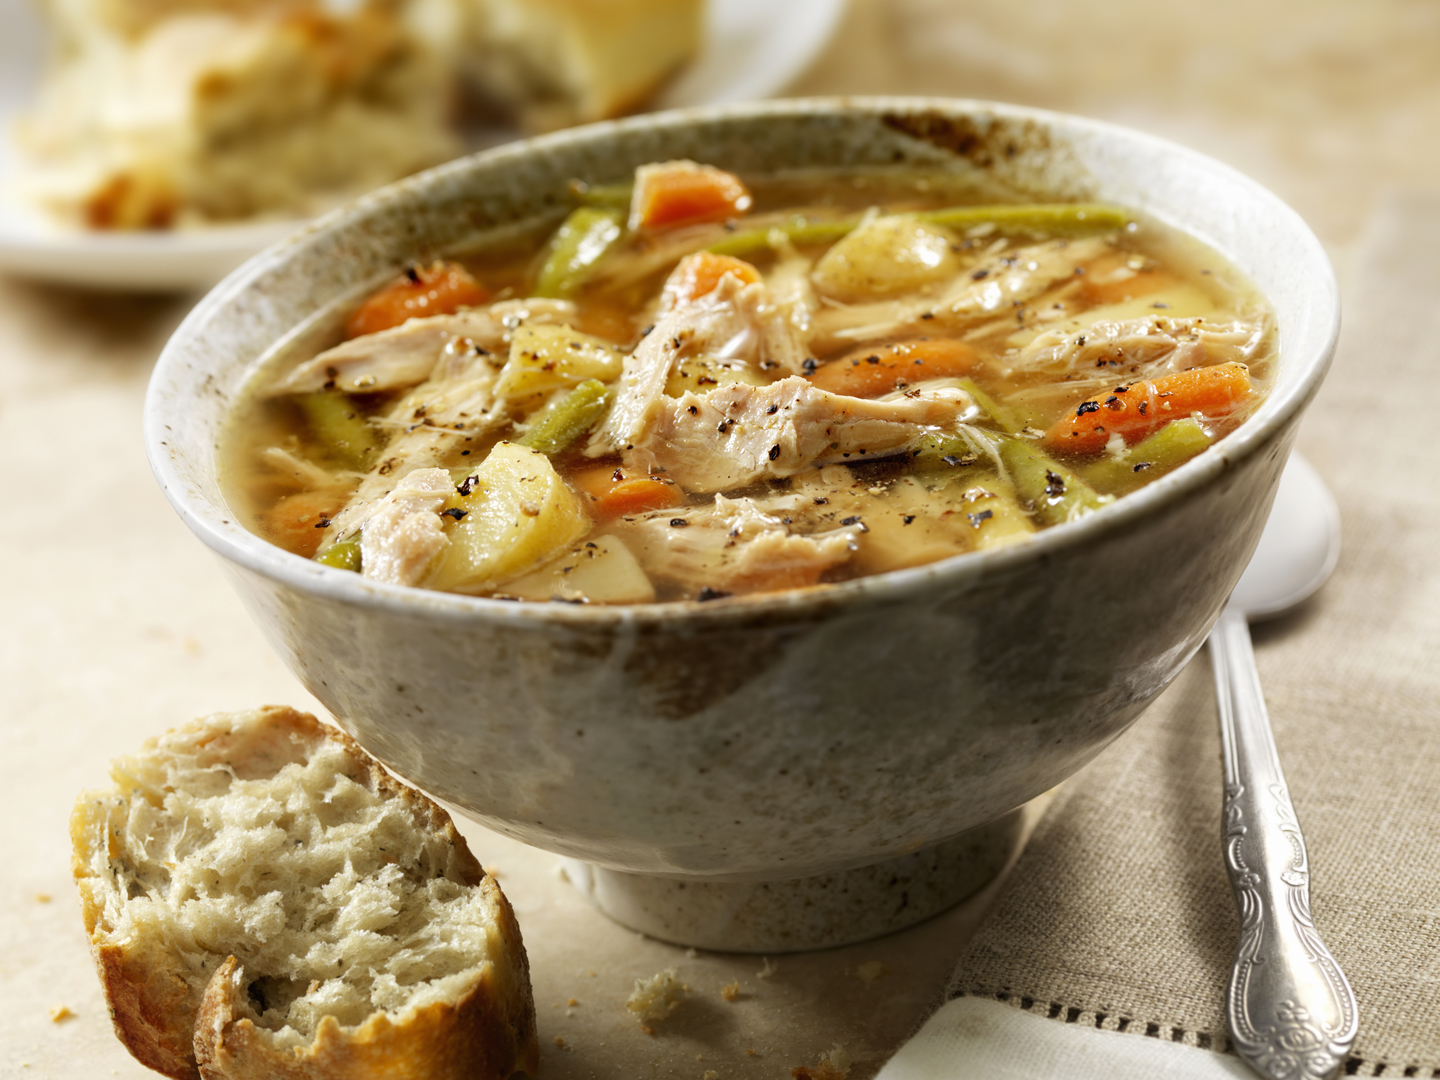 Homemade Turkey Soup with Carrots, Potatoes and Green Beans - Photographed on Hasselblad H3D2-39mb Camera